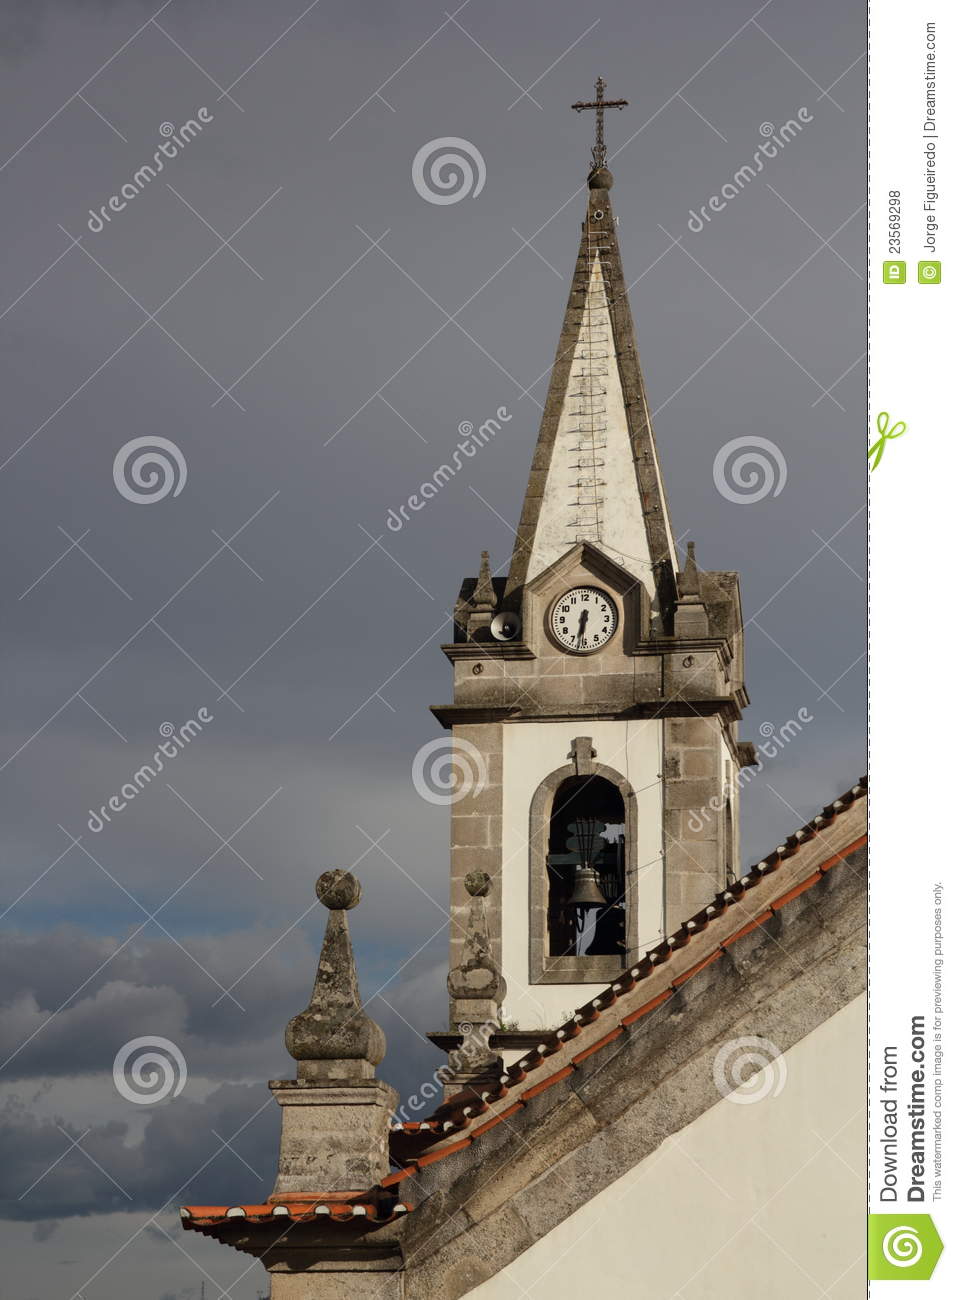 Church Bell Tower Royalty Free Stock Photos   Image  23569298